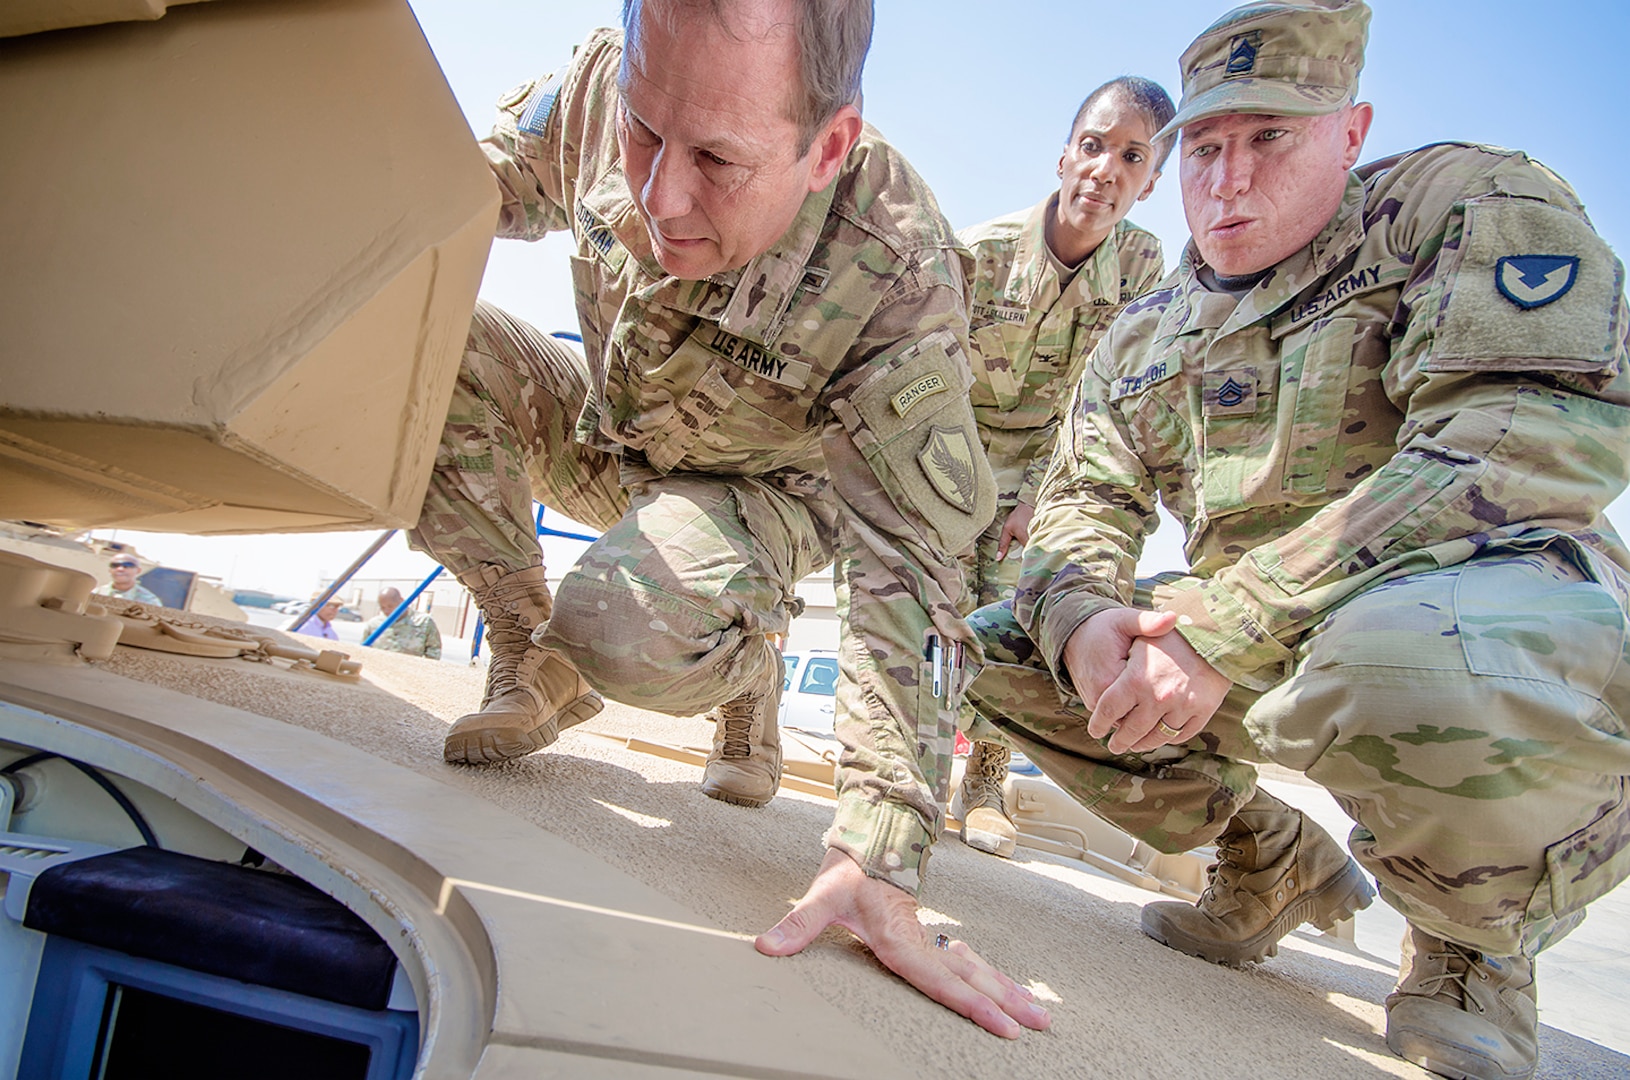 Maj. Gen. Edward Dorman (left), J-4 (logistics), U.S. Central Command, looks at a combat configured tank with Sgt. 1st Class Frank Taylor, contract officer representative, Army Field Support Battalion-Kuwait and Col. Carmelia Scott-Skillern, commander, 401st Army Field Support Brigade during a tour of an Army Prepositioned Stocks-5 warehouse at Camp Arifjan, Kuwait, July 20. (U.S. Army Photo by Justin Graff, 401st AFSB Public Affairs) (Photo Credit: U.S. Army)